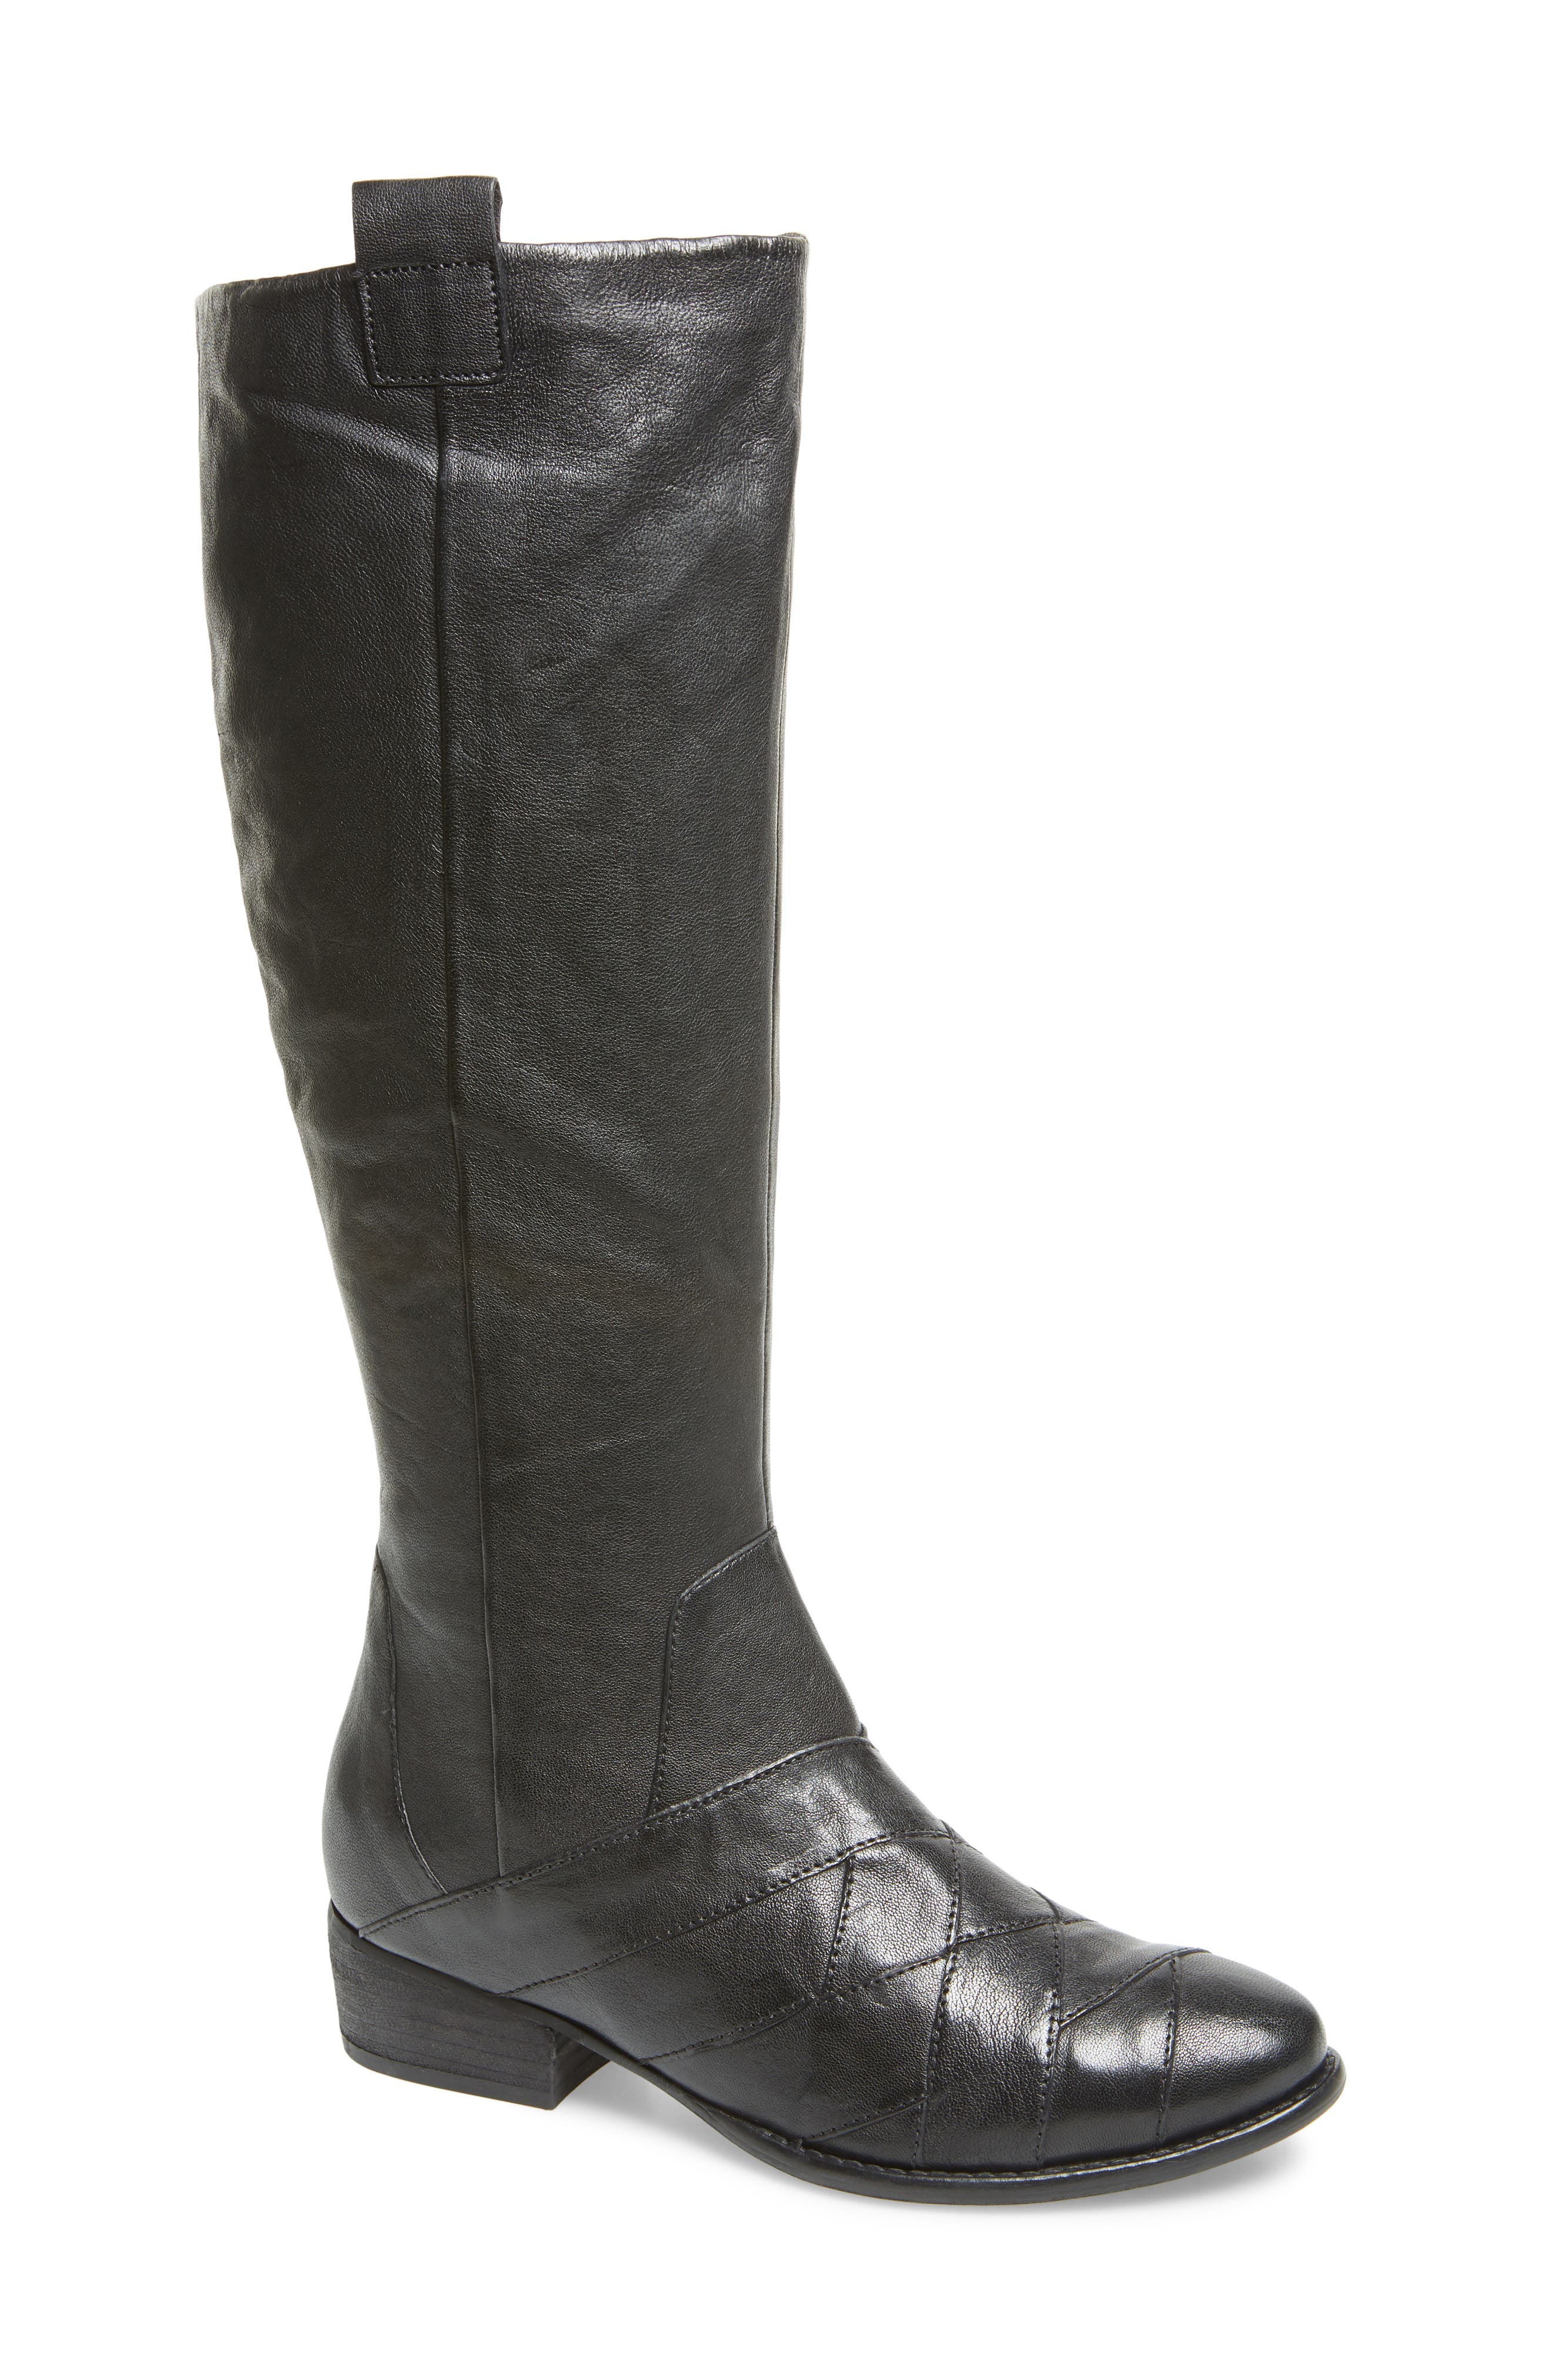 seychelles boots nordstrom